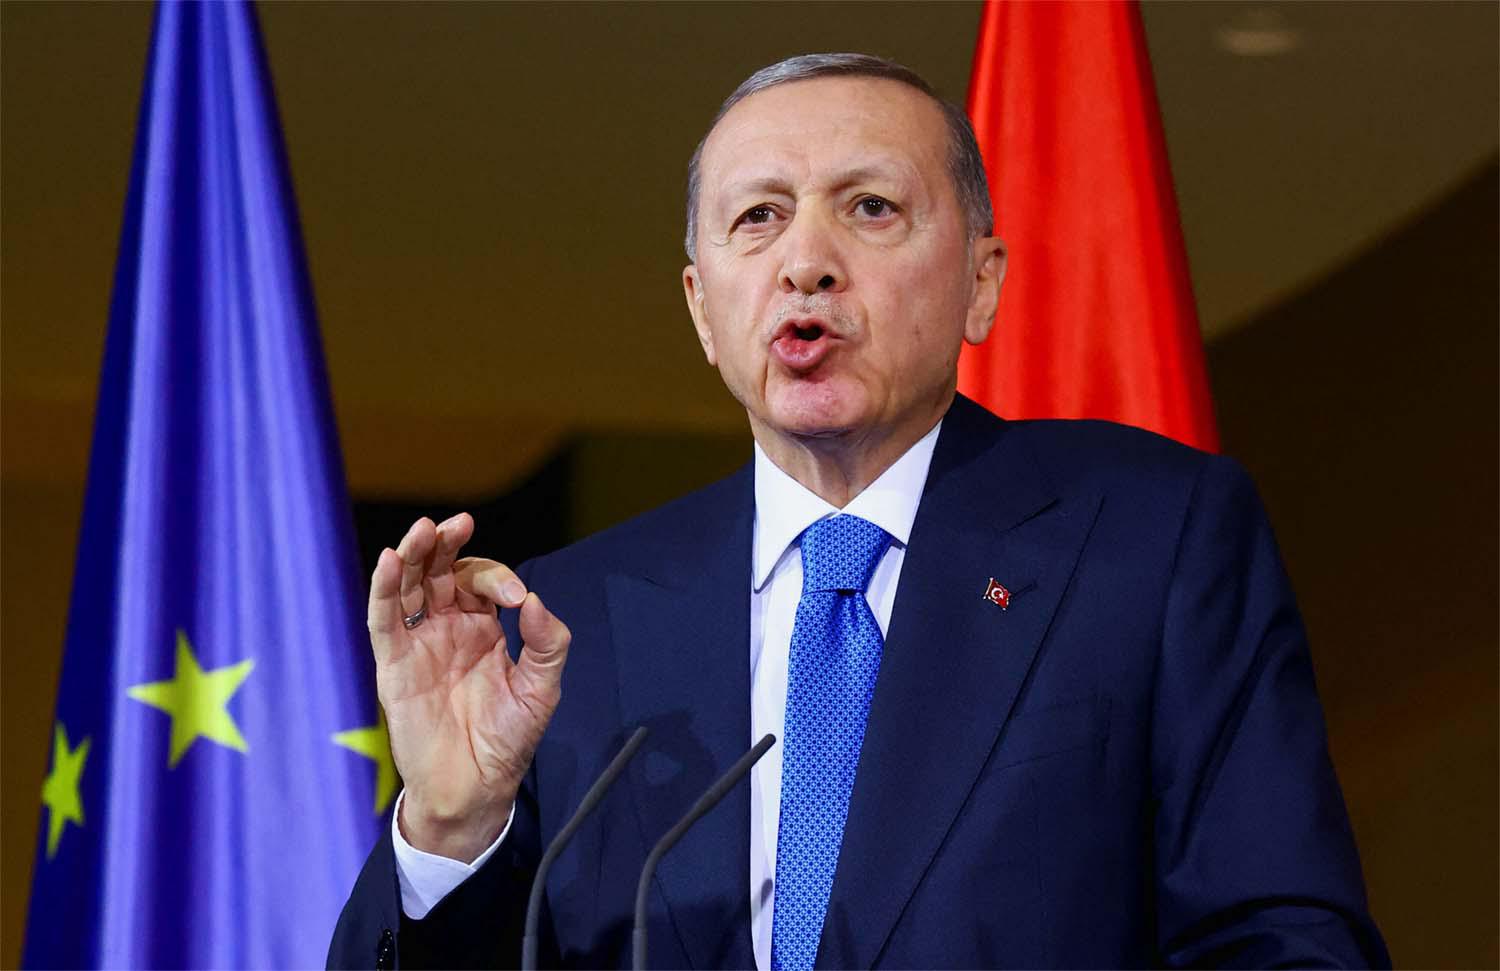 Erdogan called for Israel to hand back territories it occupies and end settlements in those territories